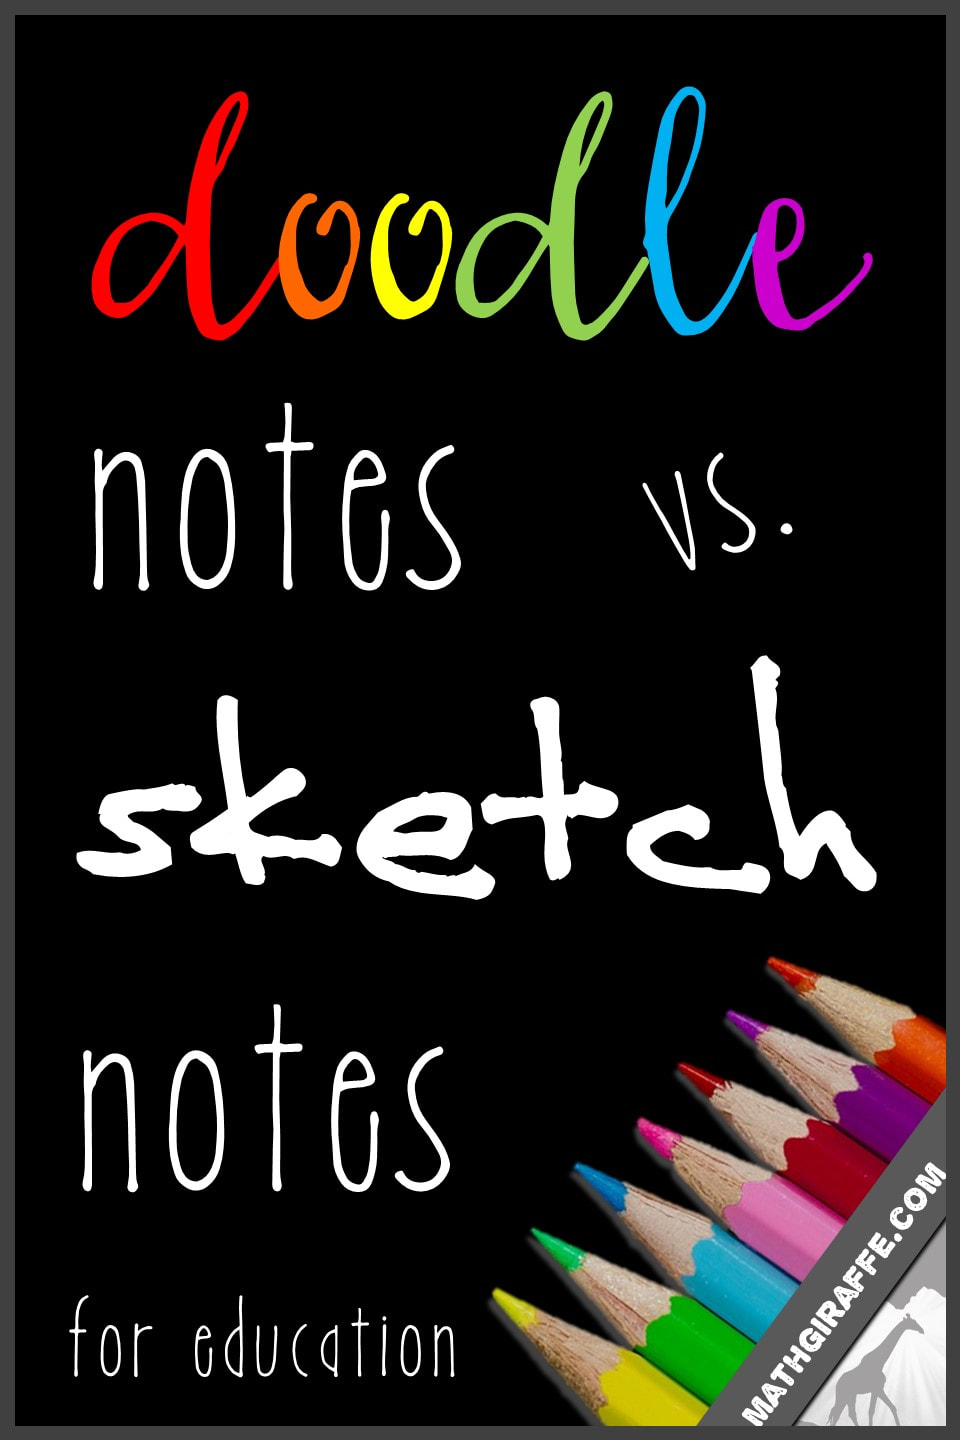 sketch notes vs. doodle notes in the classroom - teaching with visual note taking methods